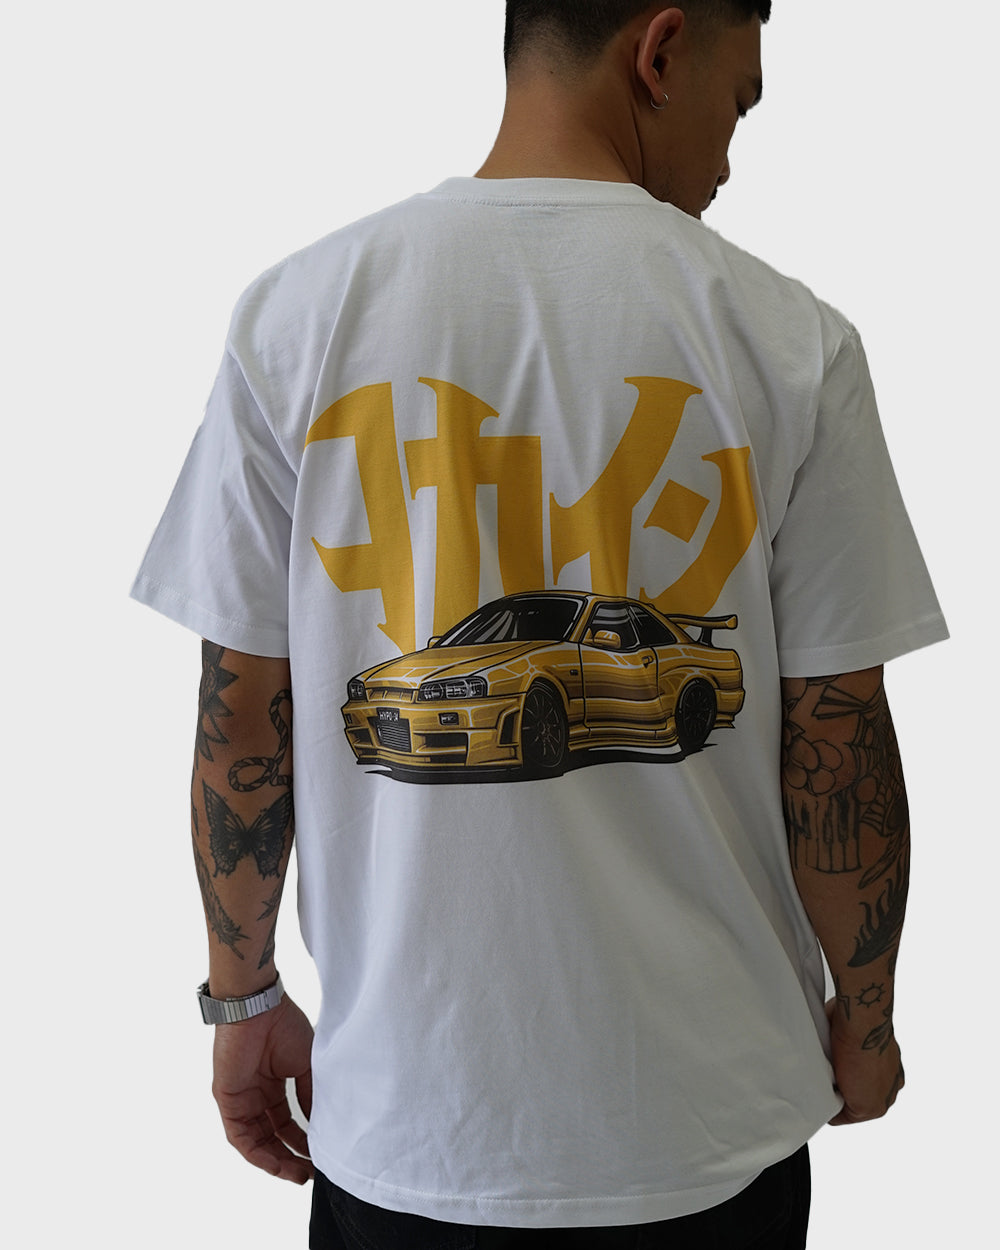 R34 @hypo_34 "Love Yours" T Shirt // White